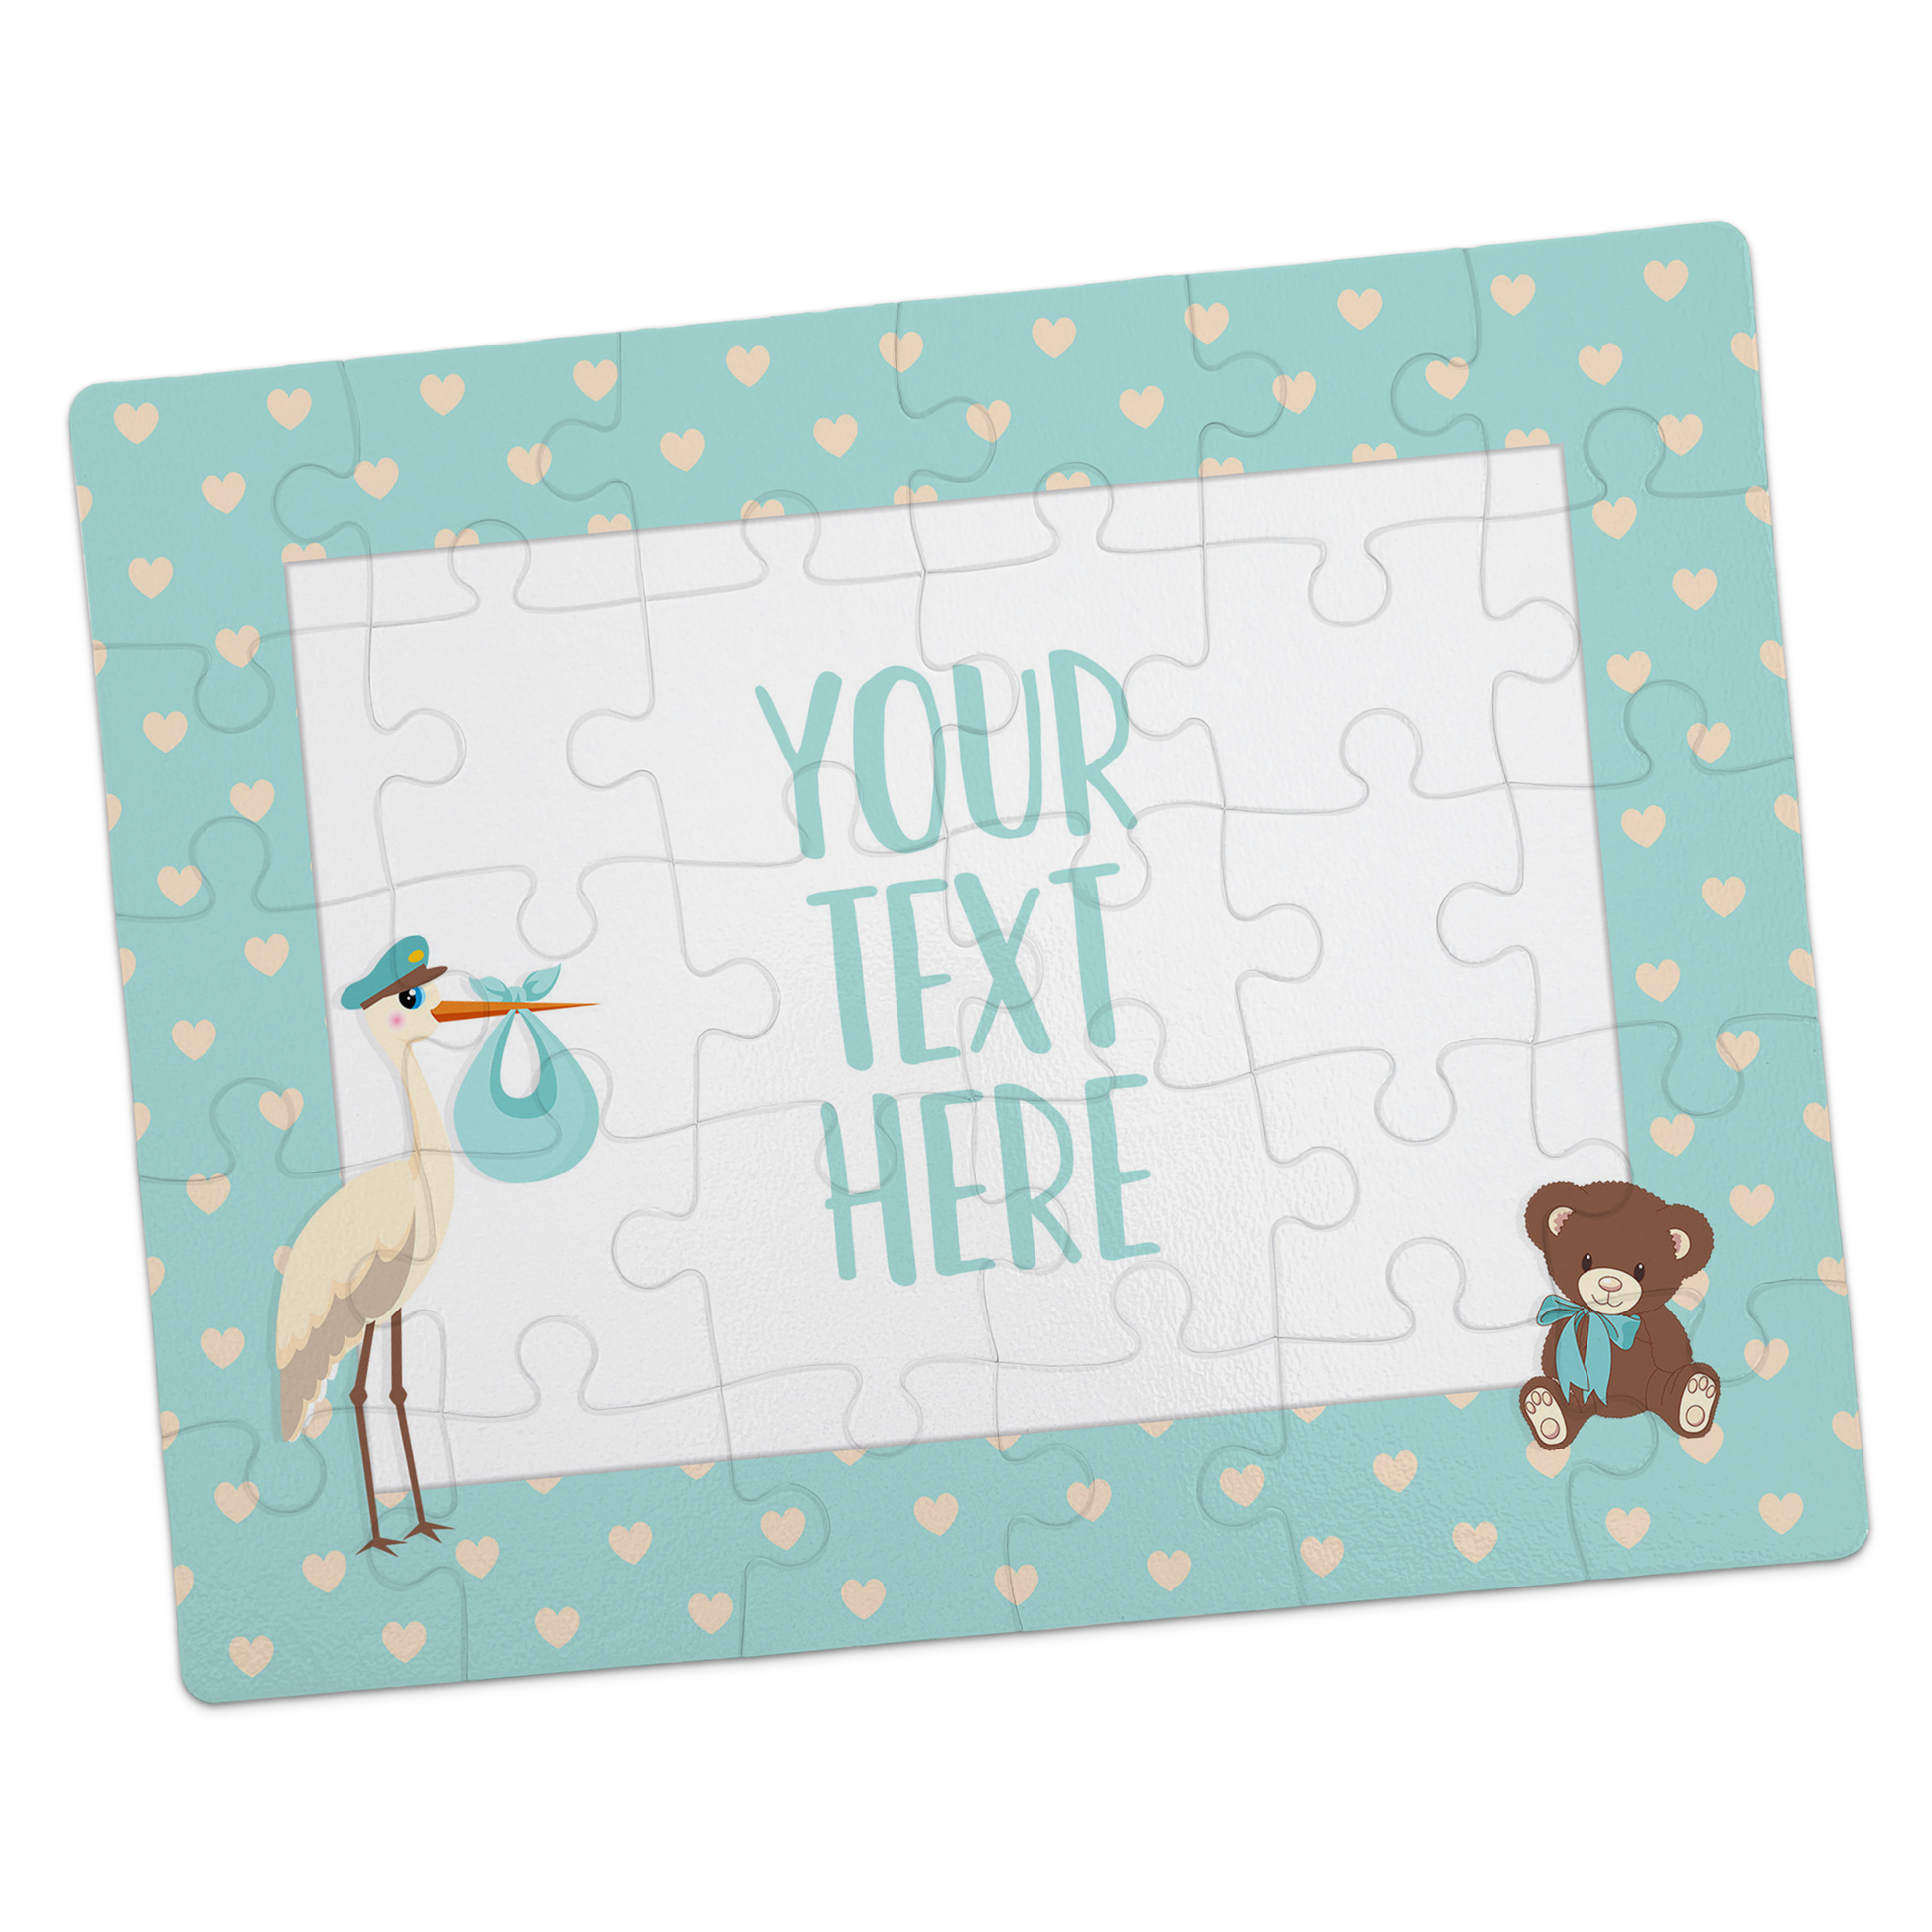 Create Your Own Puzzle - Stork Design - CYOP0255 | S'Berry Boutique